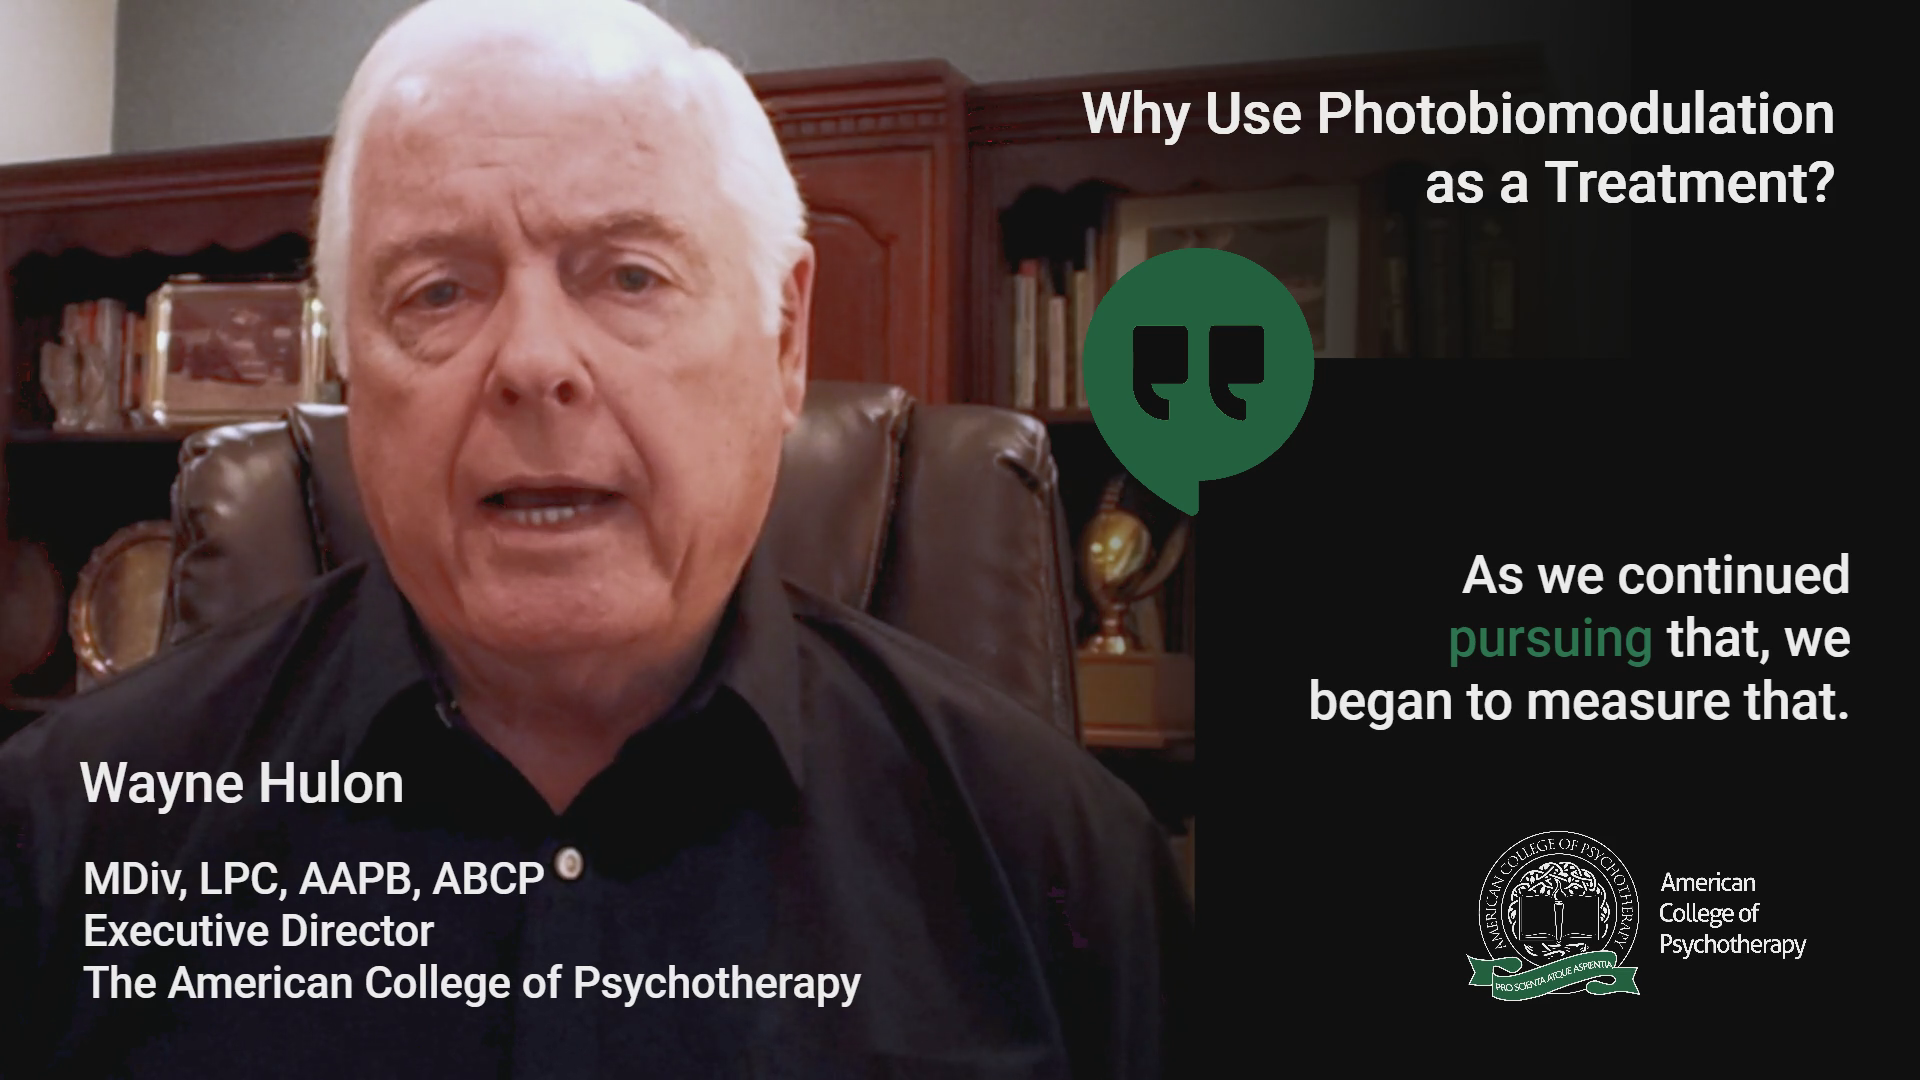 Does Photobiomodulation Fit into Psychotherapy